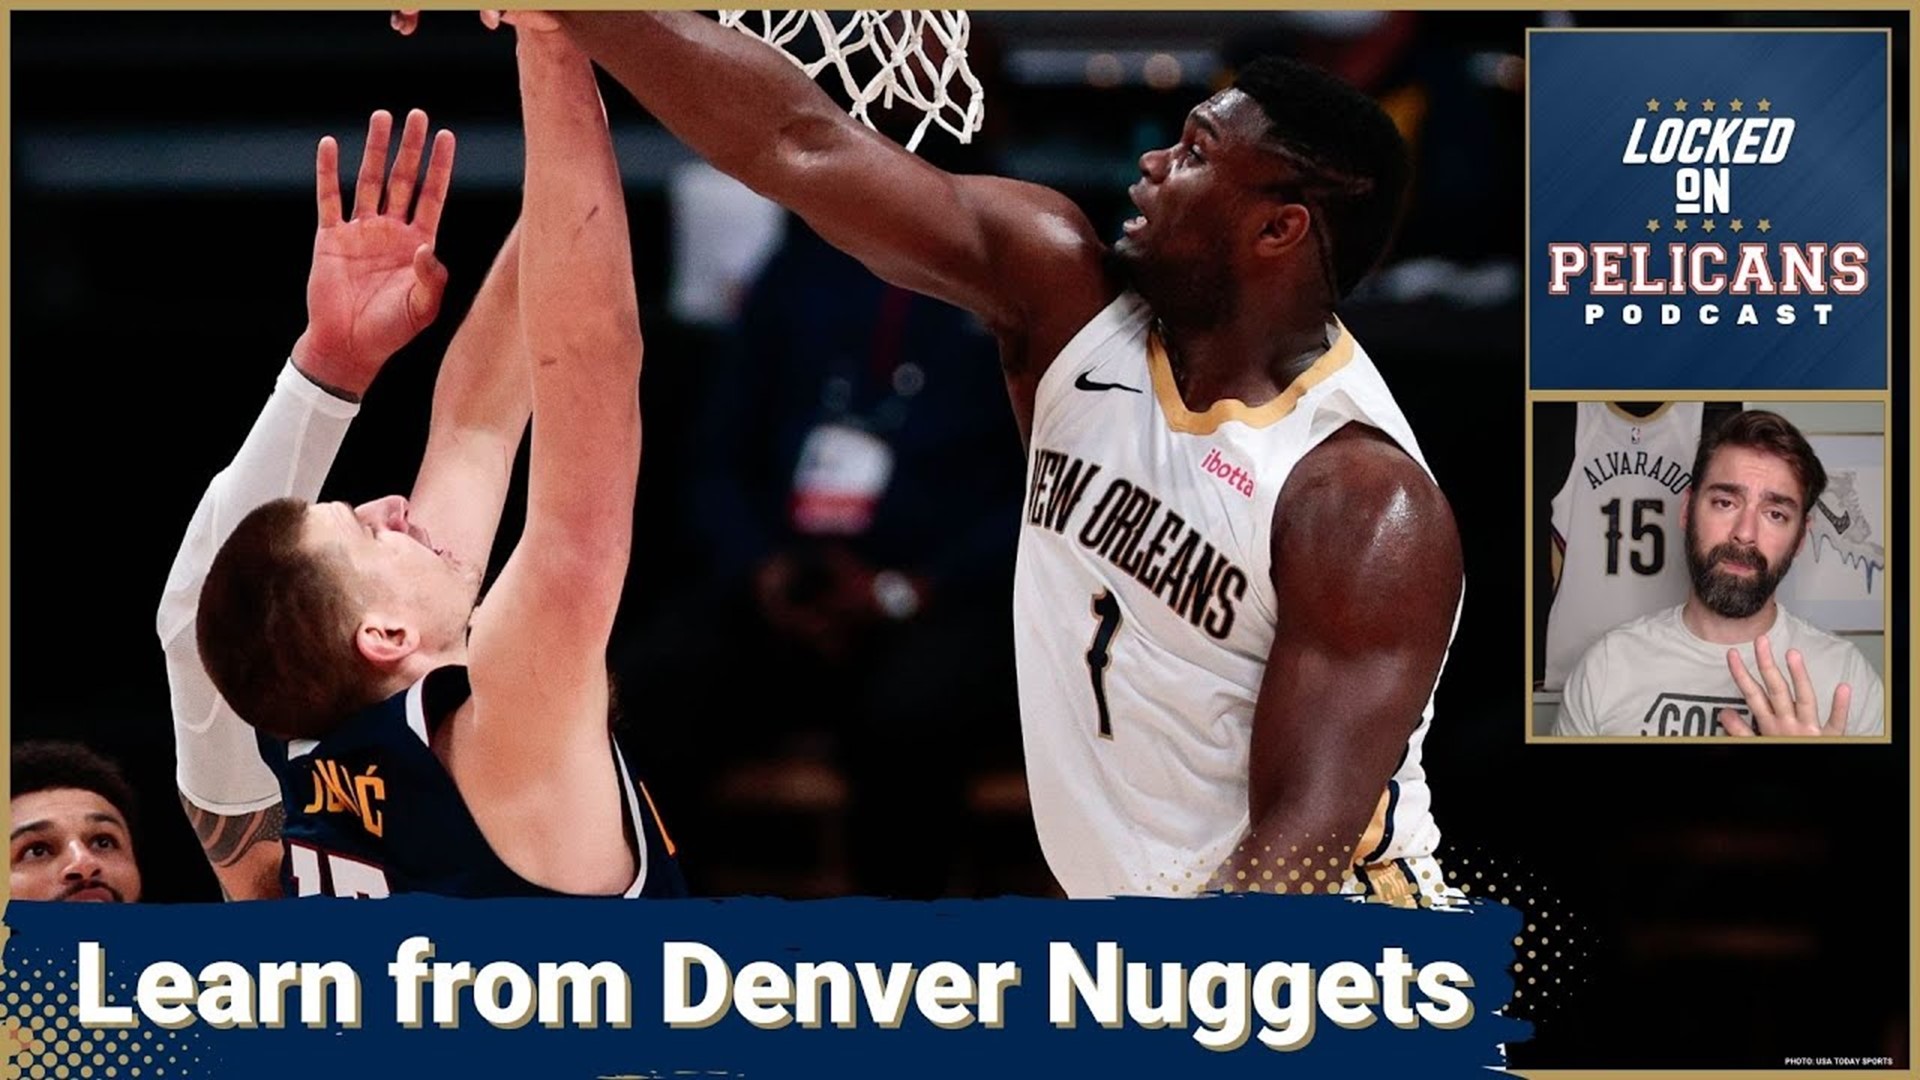 The Denver Nuggets are in the NBA Finals and if the New Orleans Pelicans learn one major lesson from them they could be too. Jake Madison says patience is key